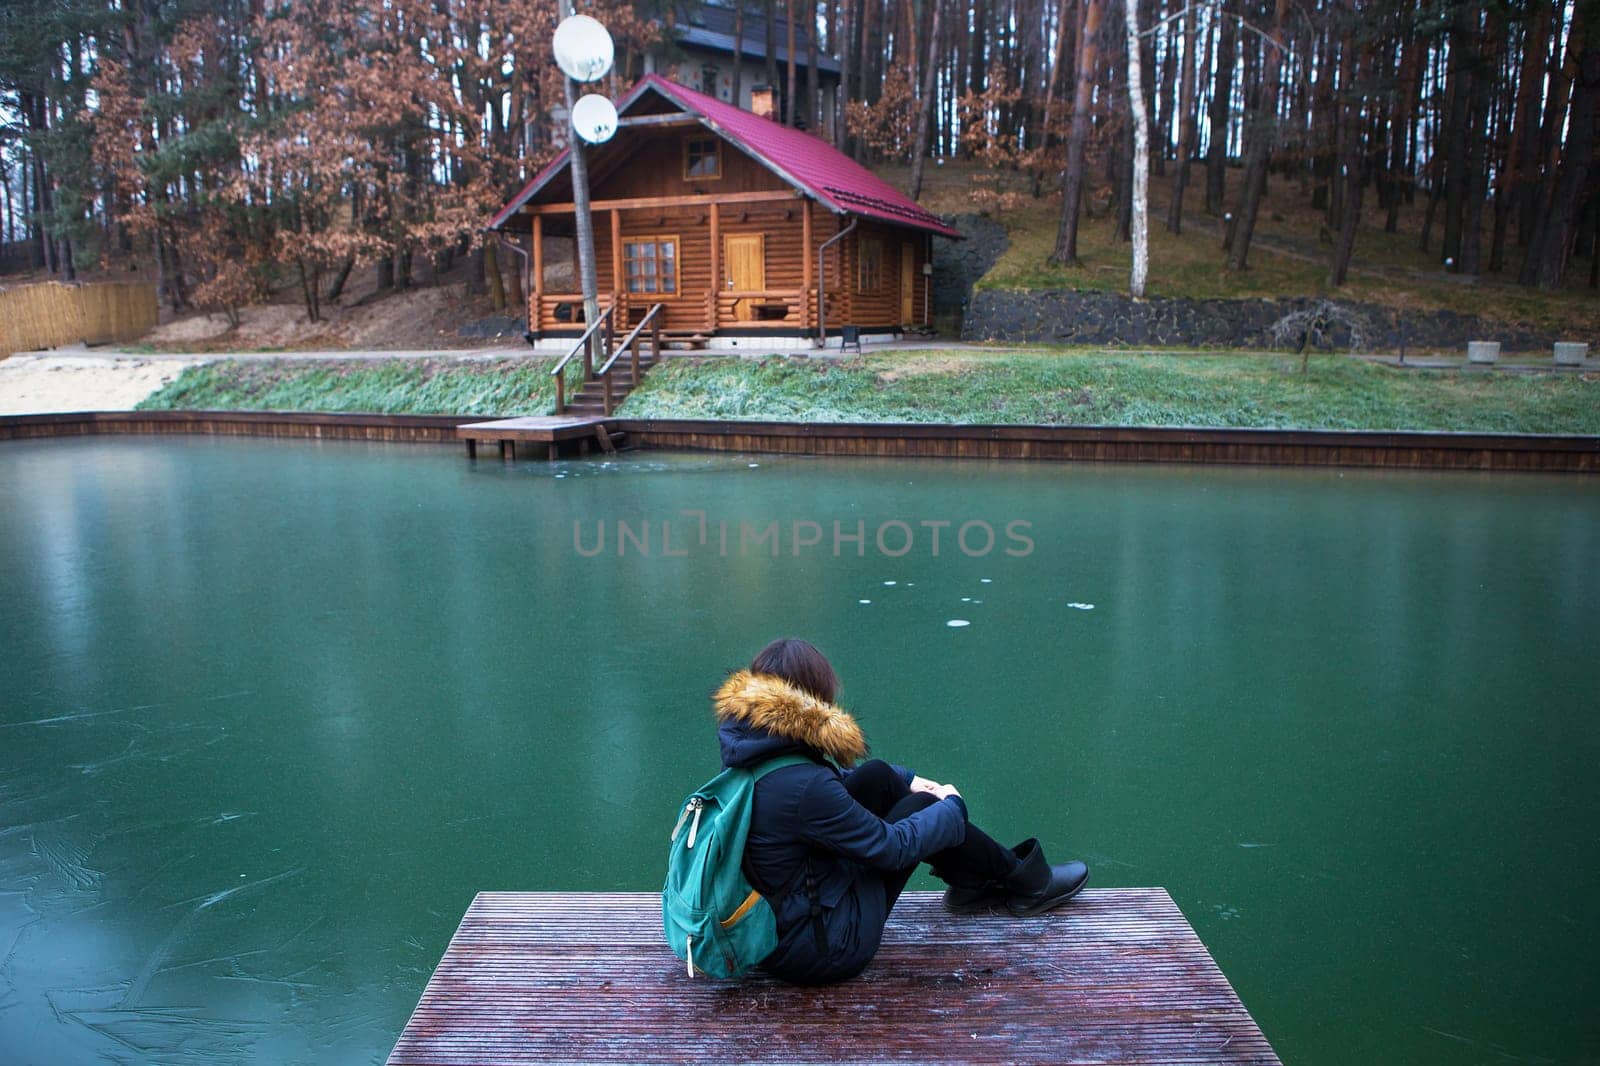 the girl is sitting with her back on a wooden bridge in a pine forest.